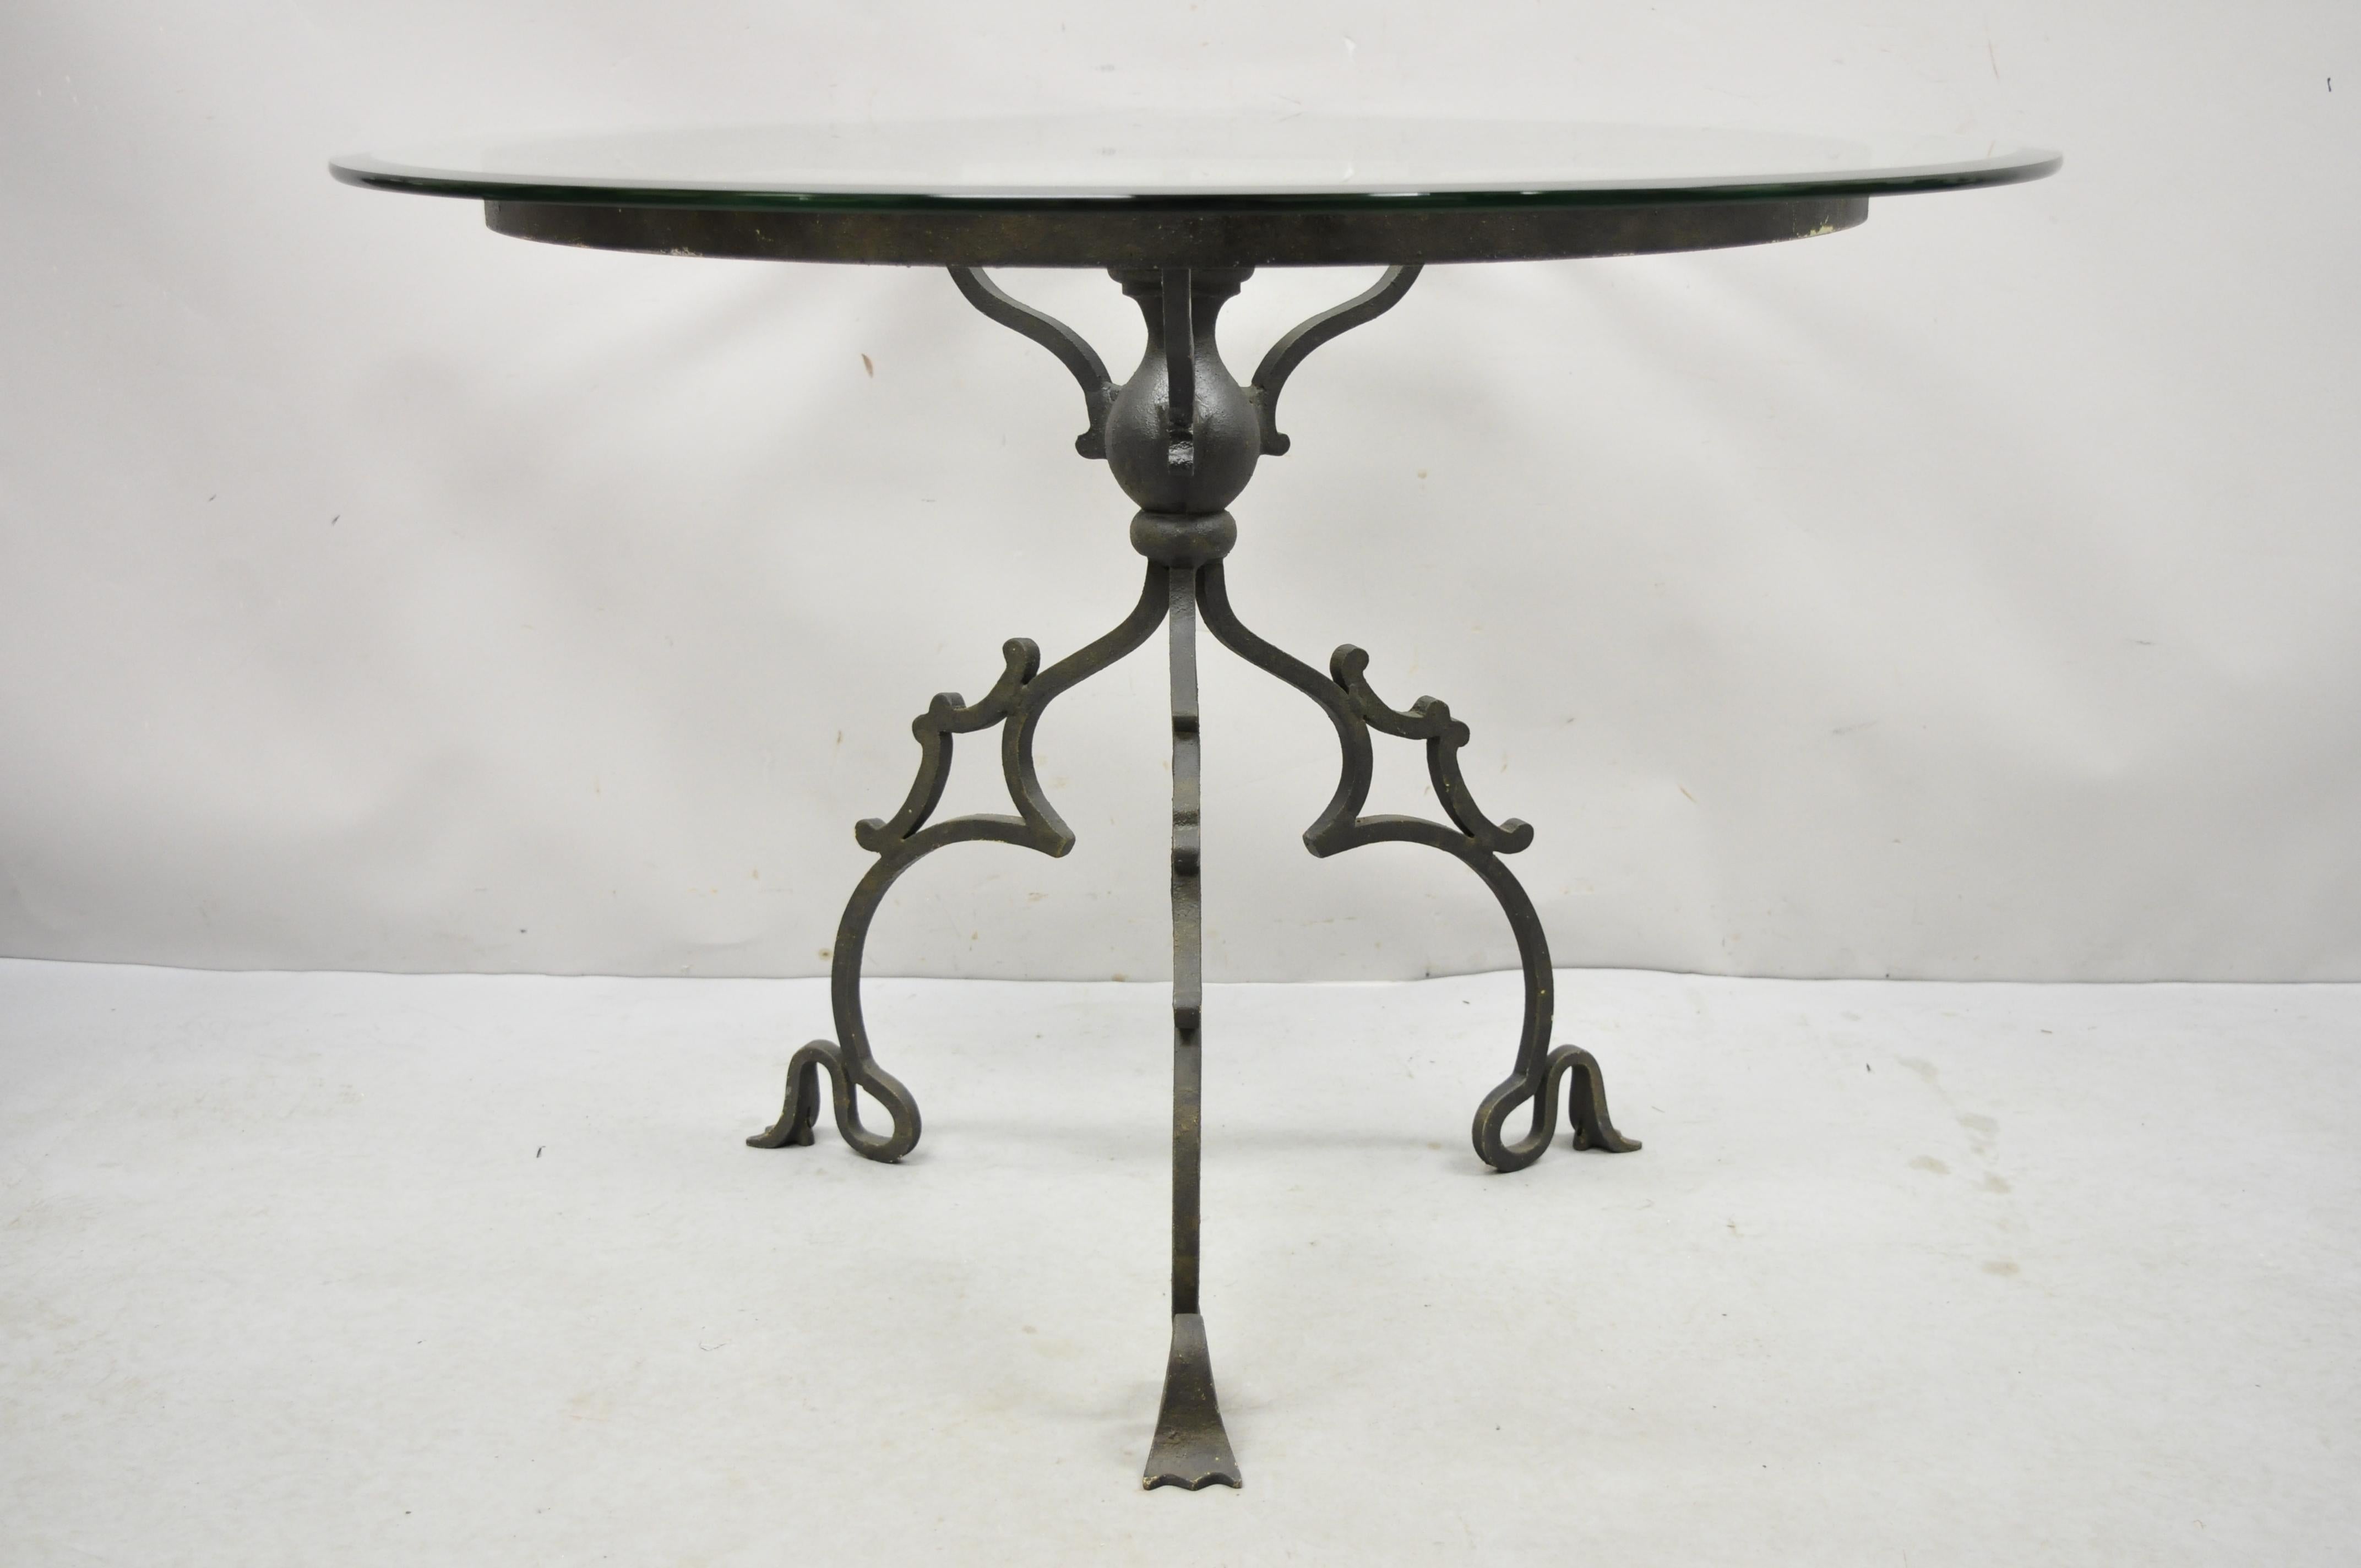 Wrought Iron Gothic style scrolling base round glass top center table. Item features a ornate wrought iron scrolling gothic style base, round glass top, quality craftsmanship, great style form, base alone 50lbs. Circa Mid to Late 20th Century.